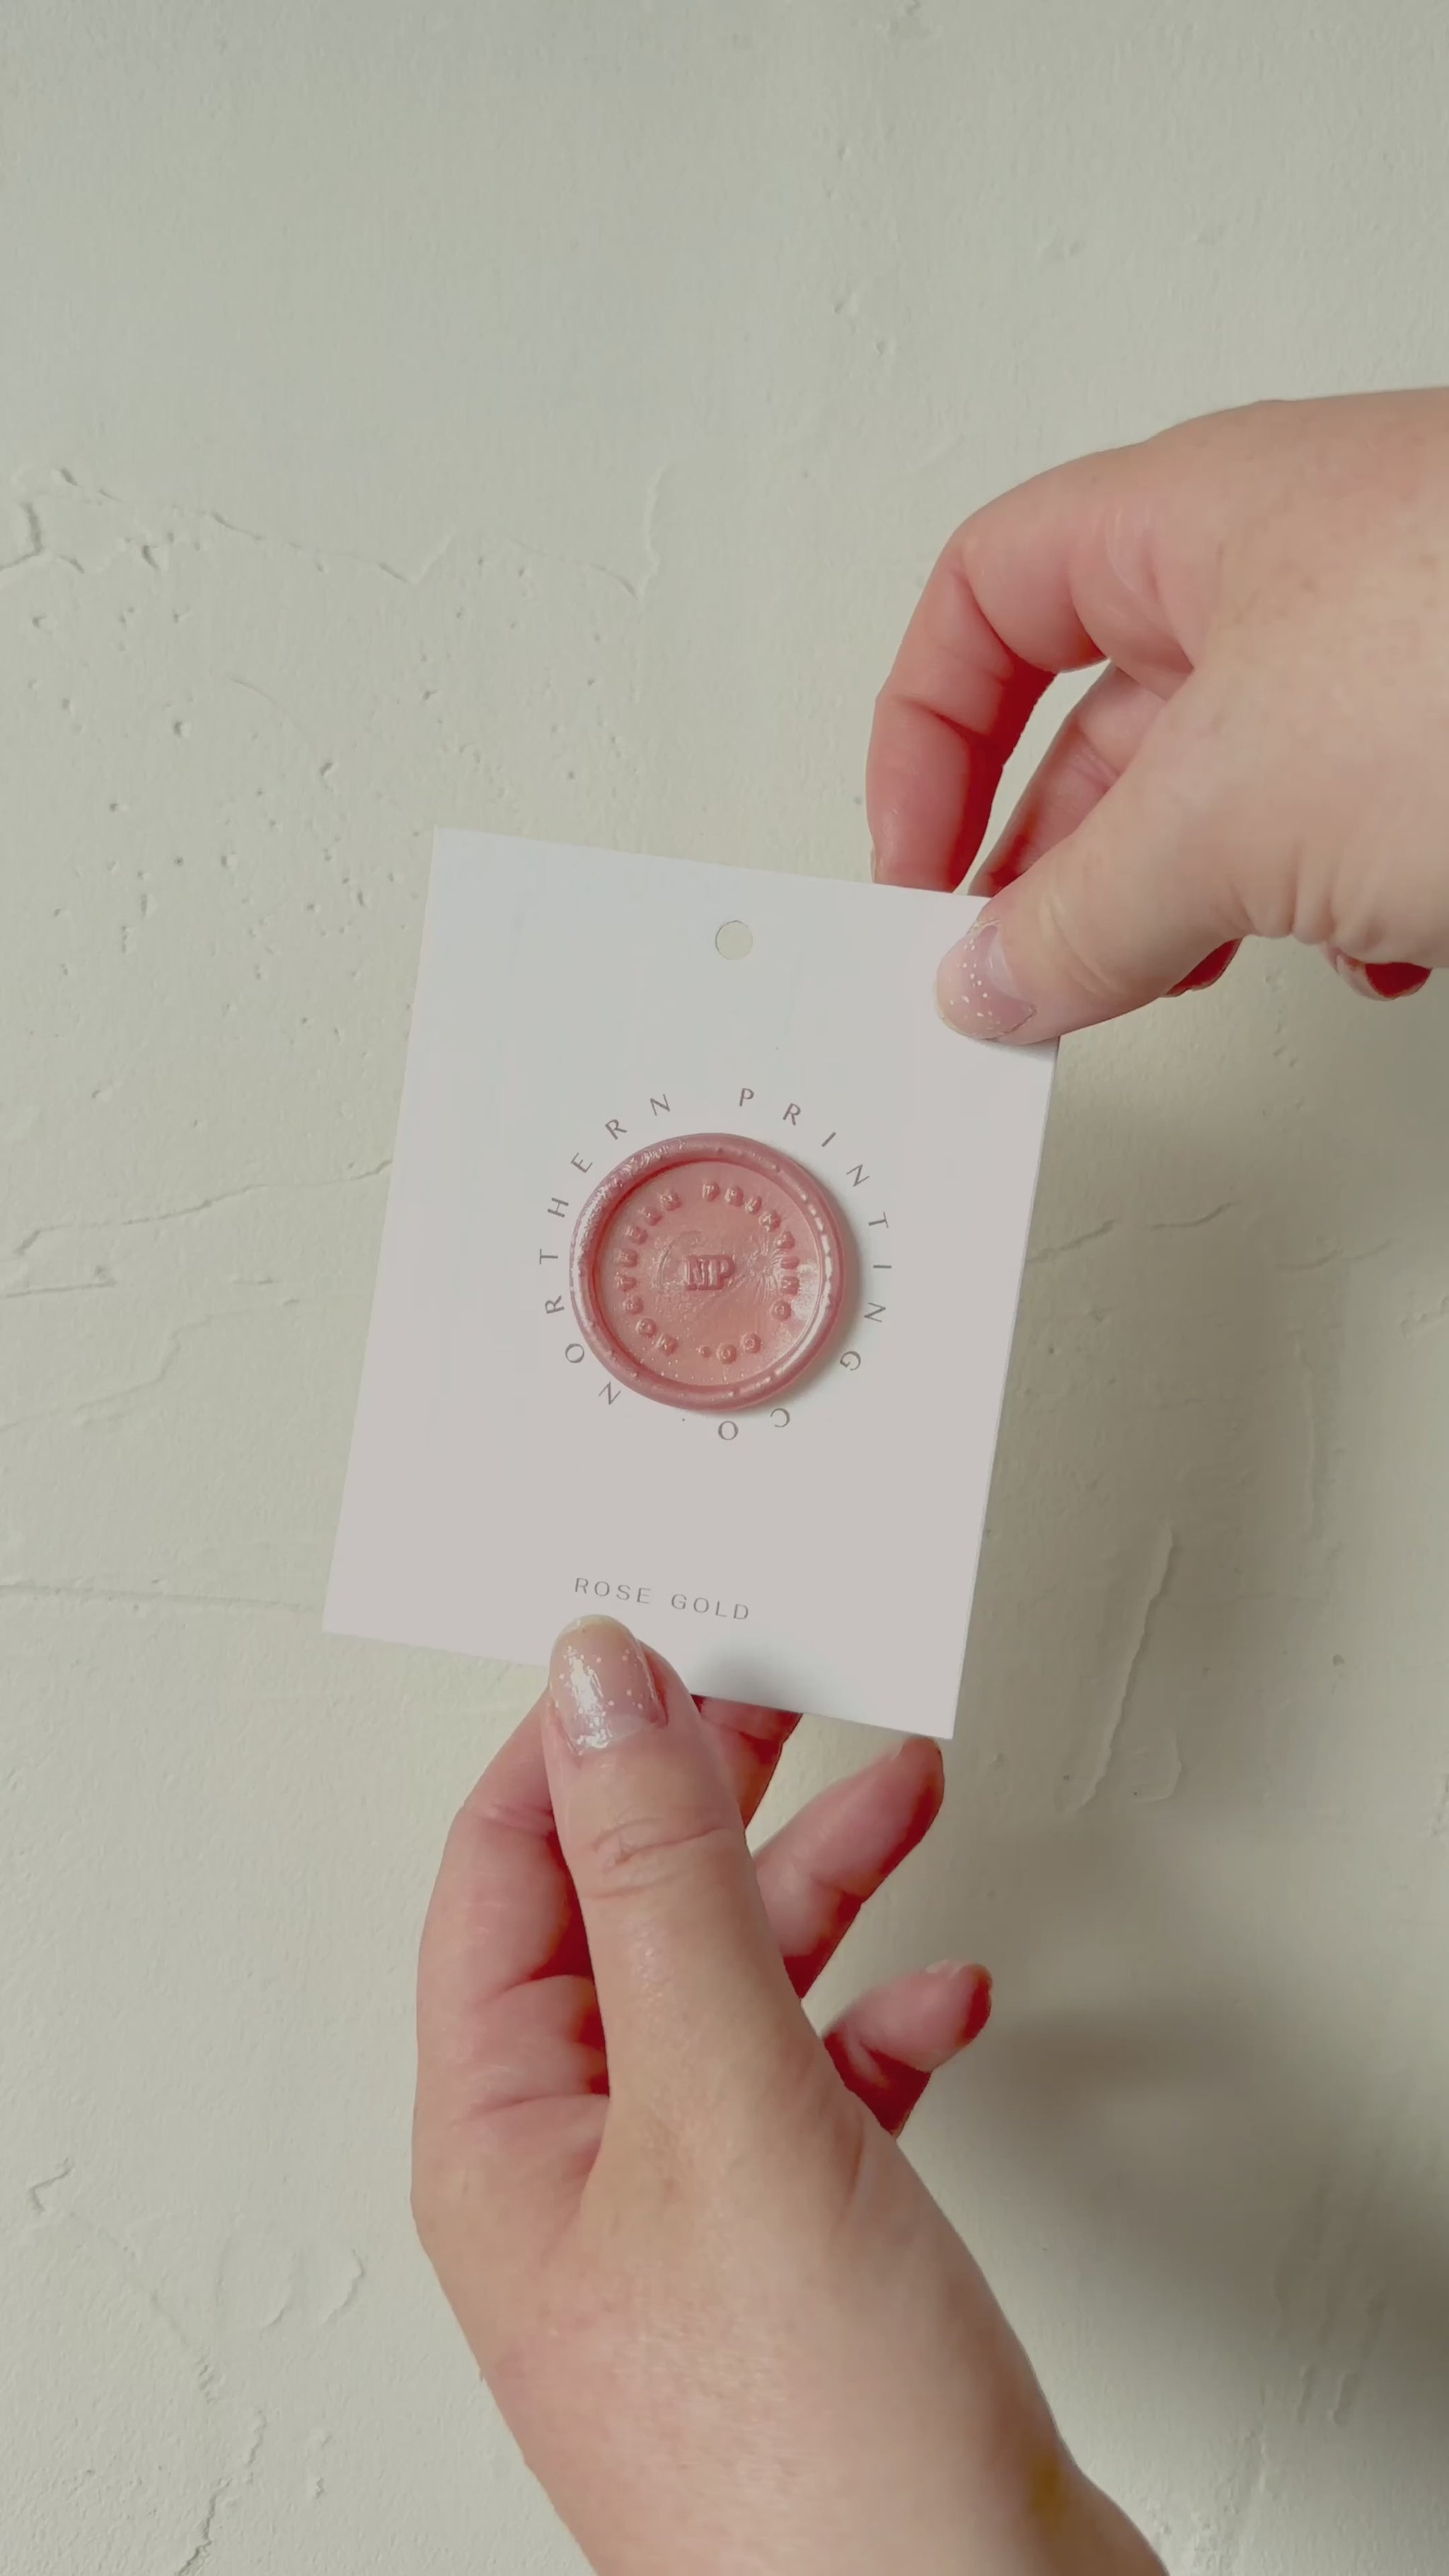 Video of Rose Gold wax seal stamp sample on textured background